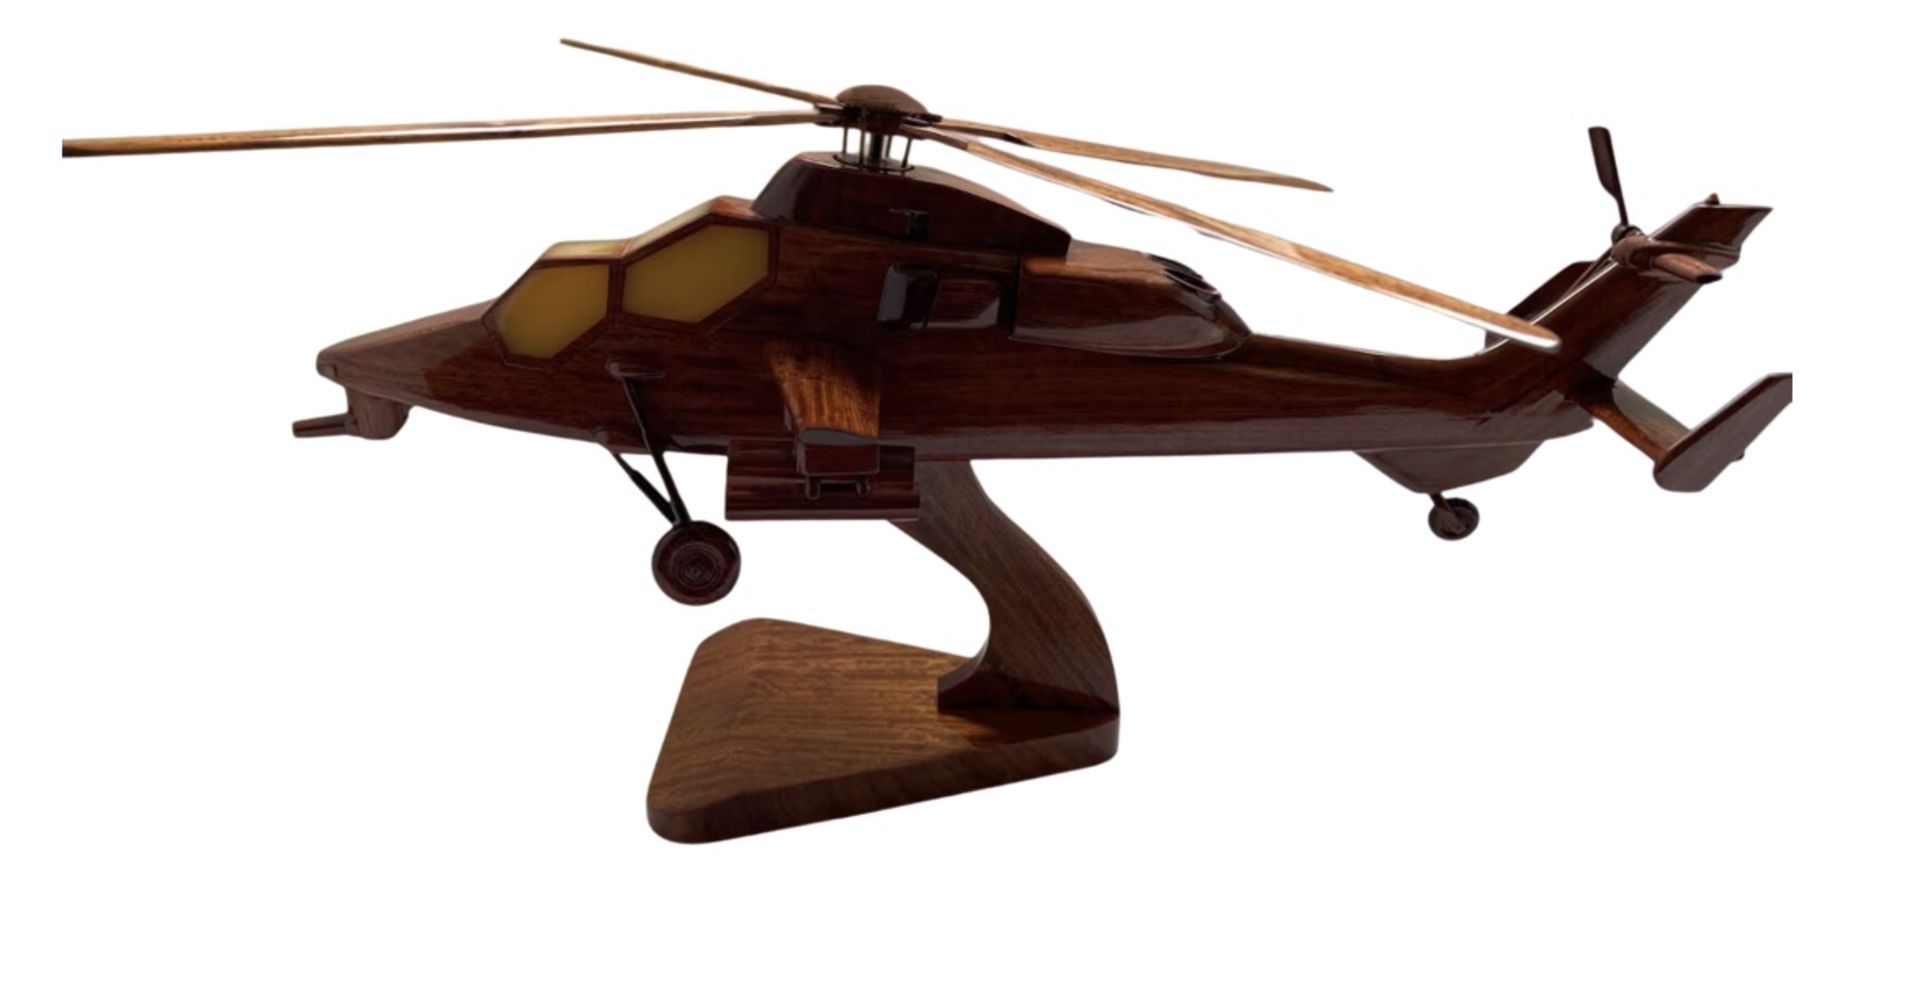 Eurocopter / Airbus Tiger Wooden Scale Desk Display Model - Image 2 of 7